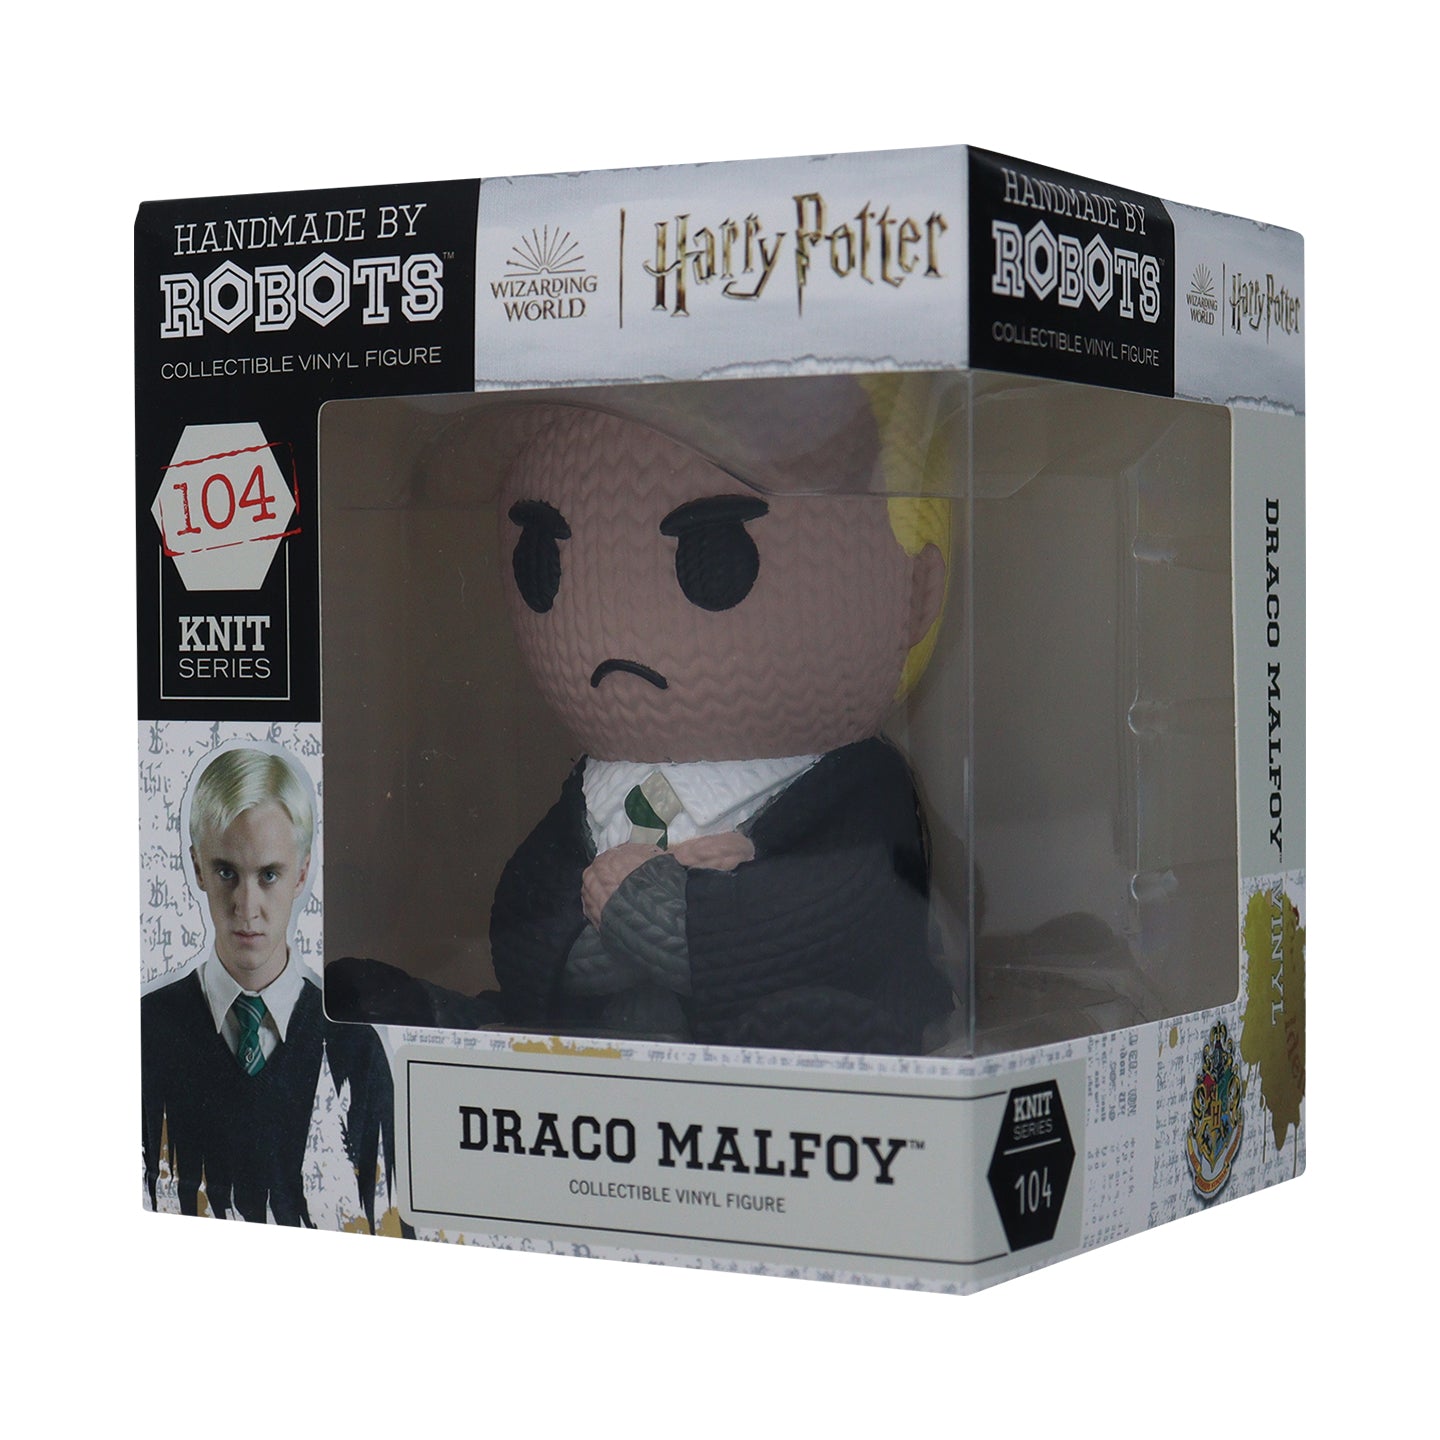 Harry Potter - Draco Malfoy Collectible Vinyl Figure from Handmade By Robots